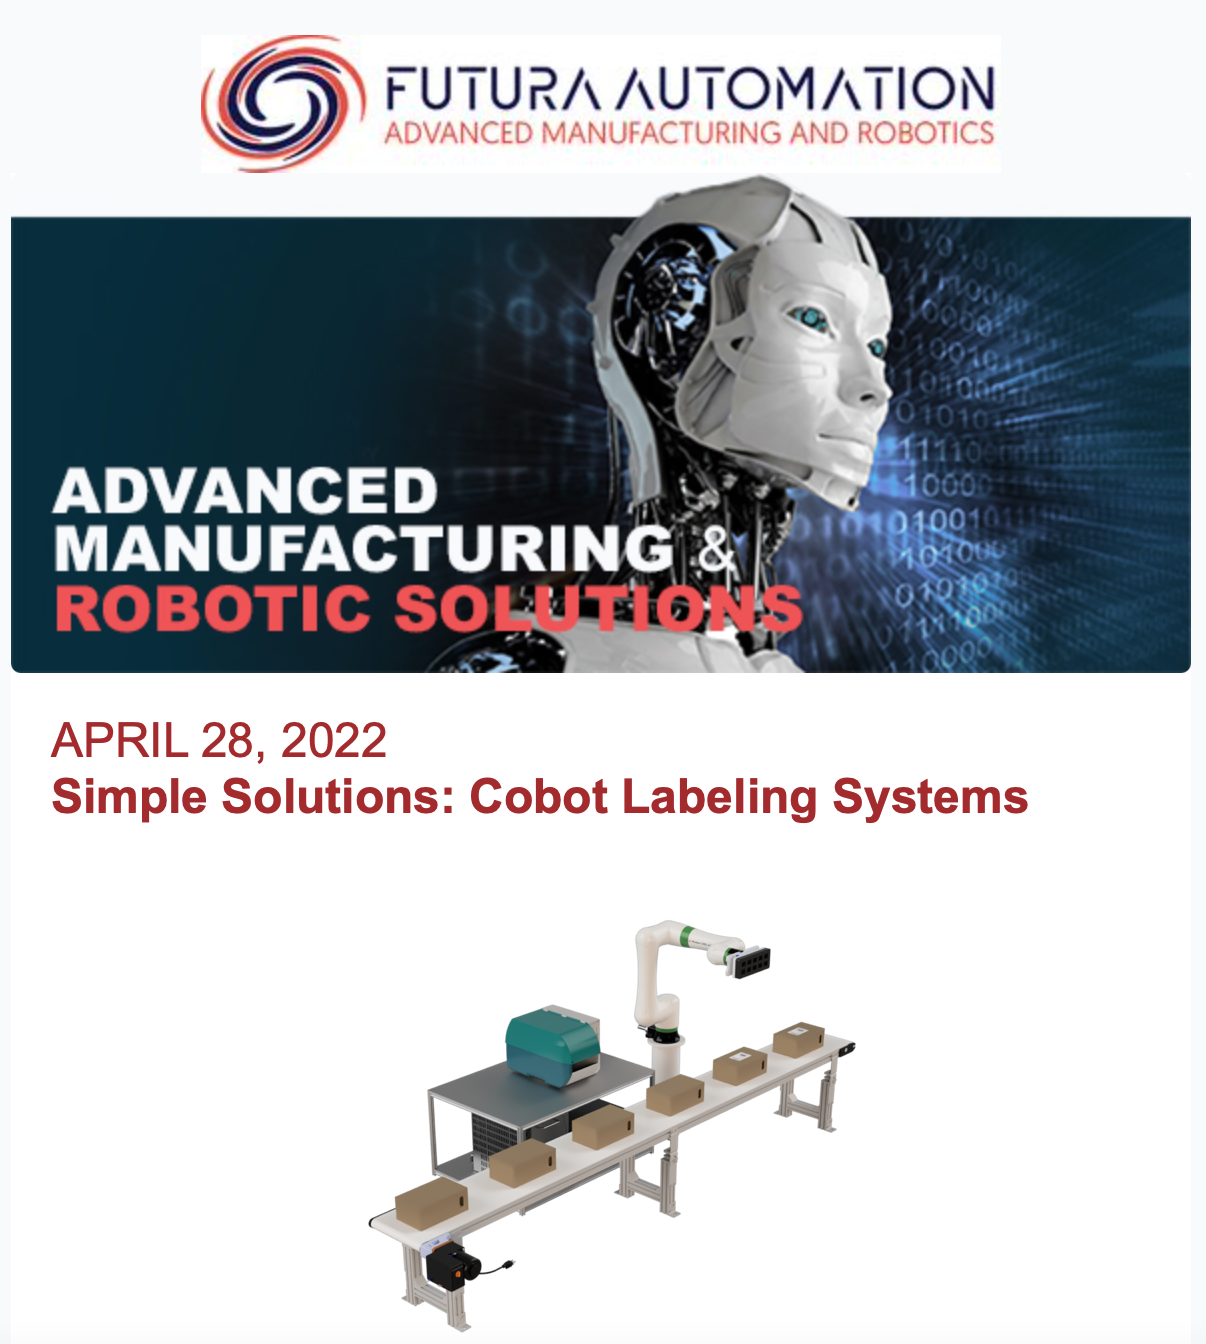 Futura Automation Newsletter: Simple Solutions - April 28, 2022